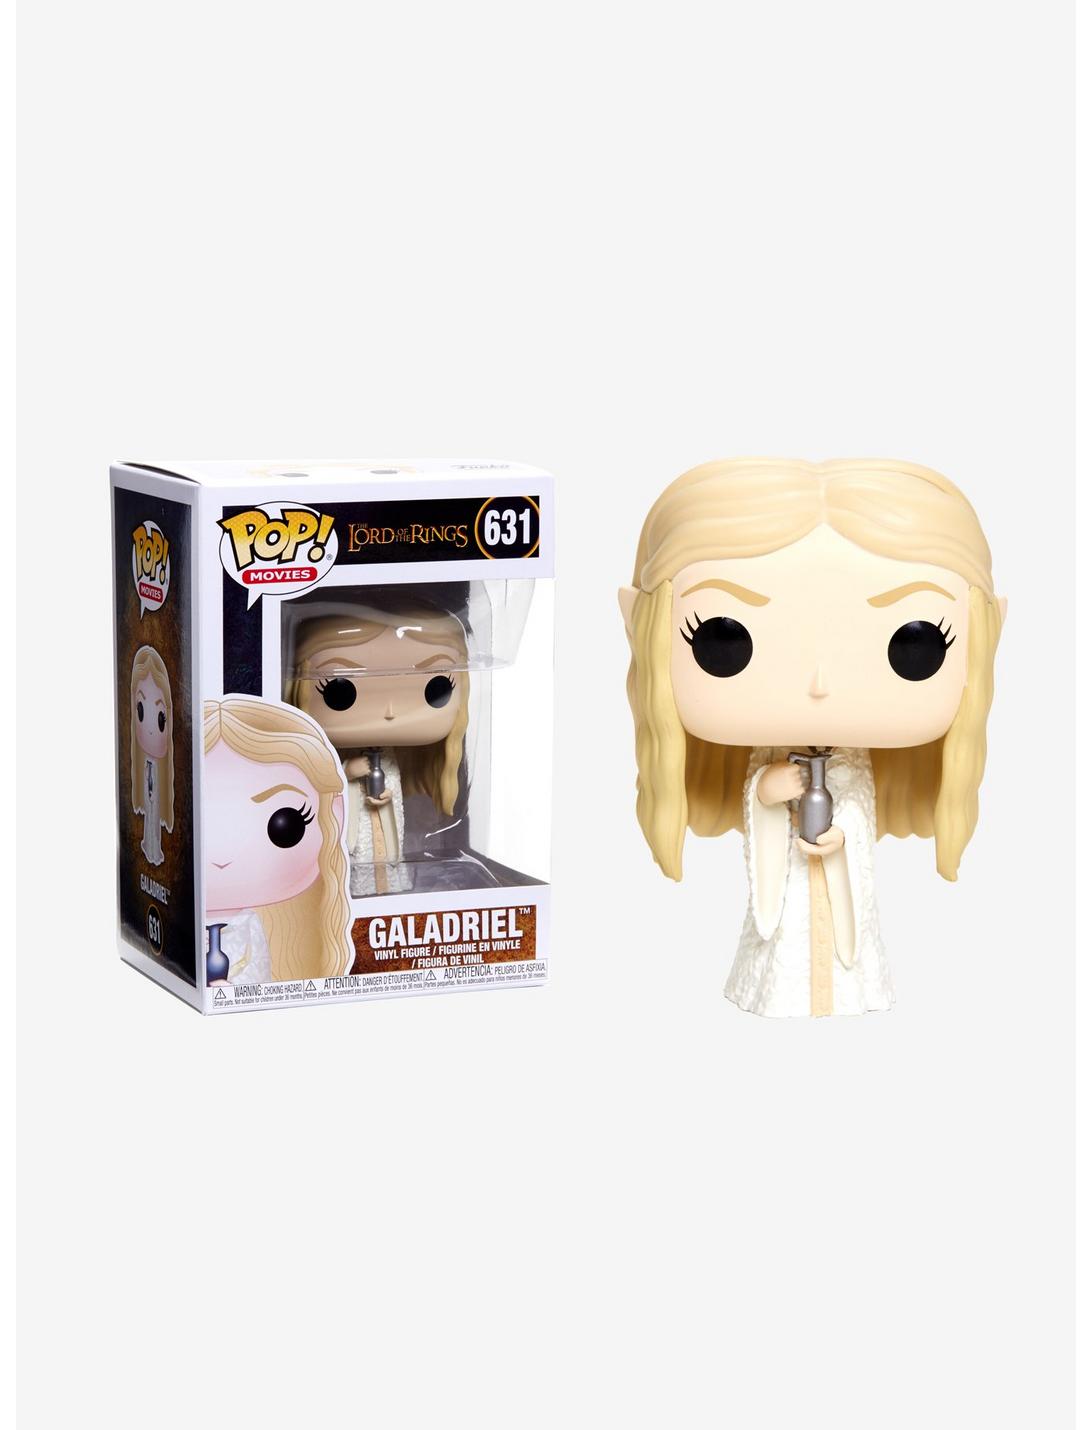 New in stock Lord Of The Rings Galadriel Pop Vinyl Figure 631 